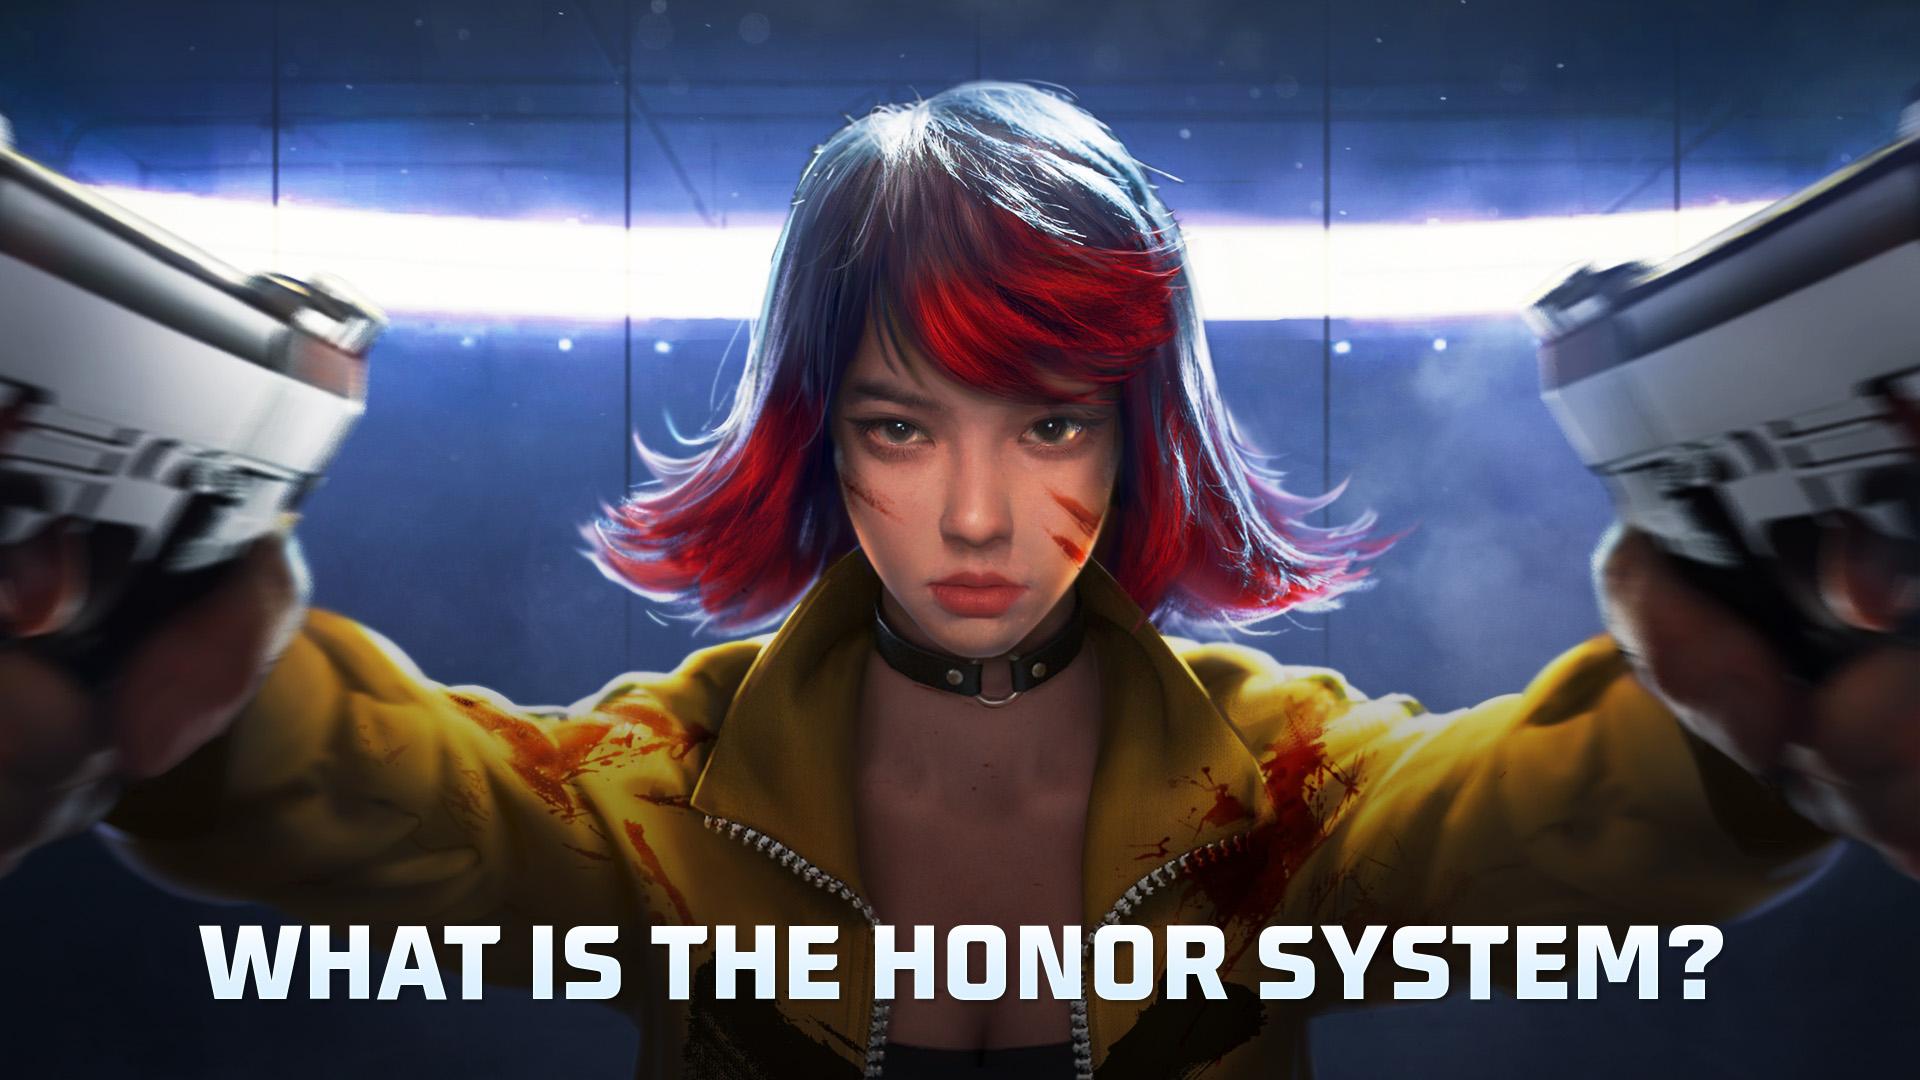 What Is the Honor System?